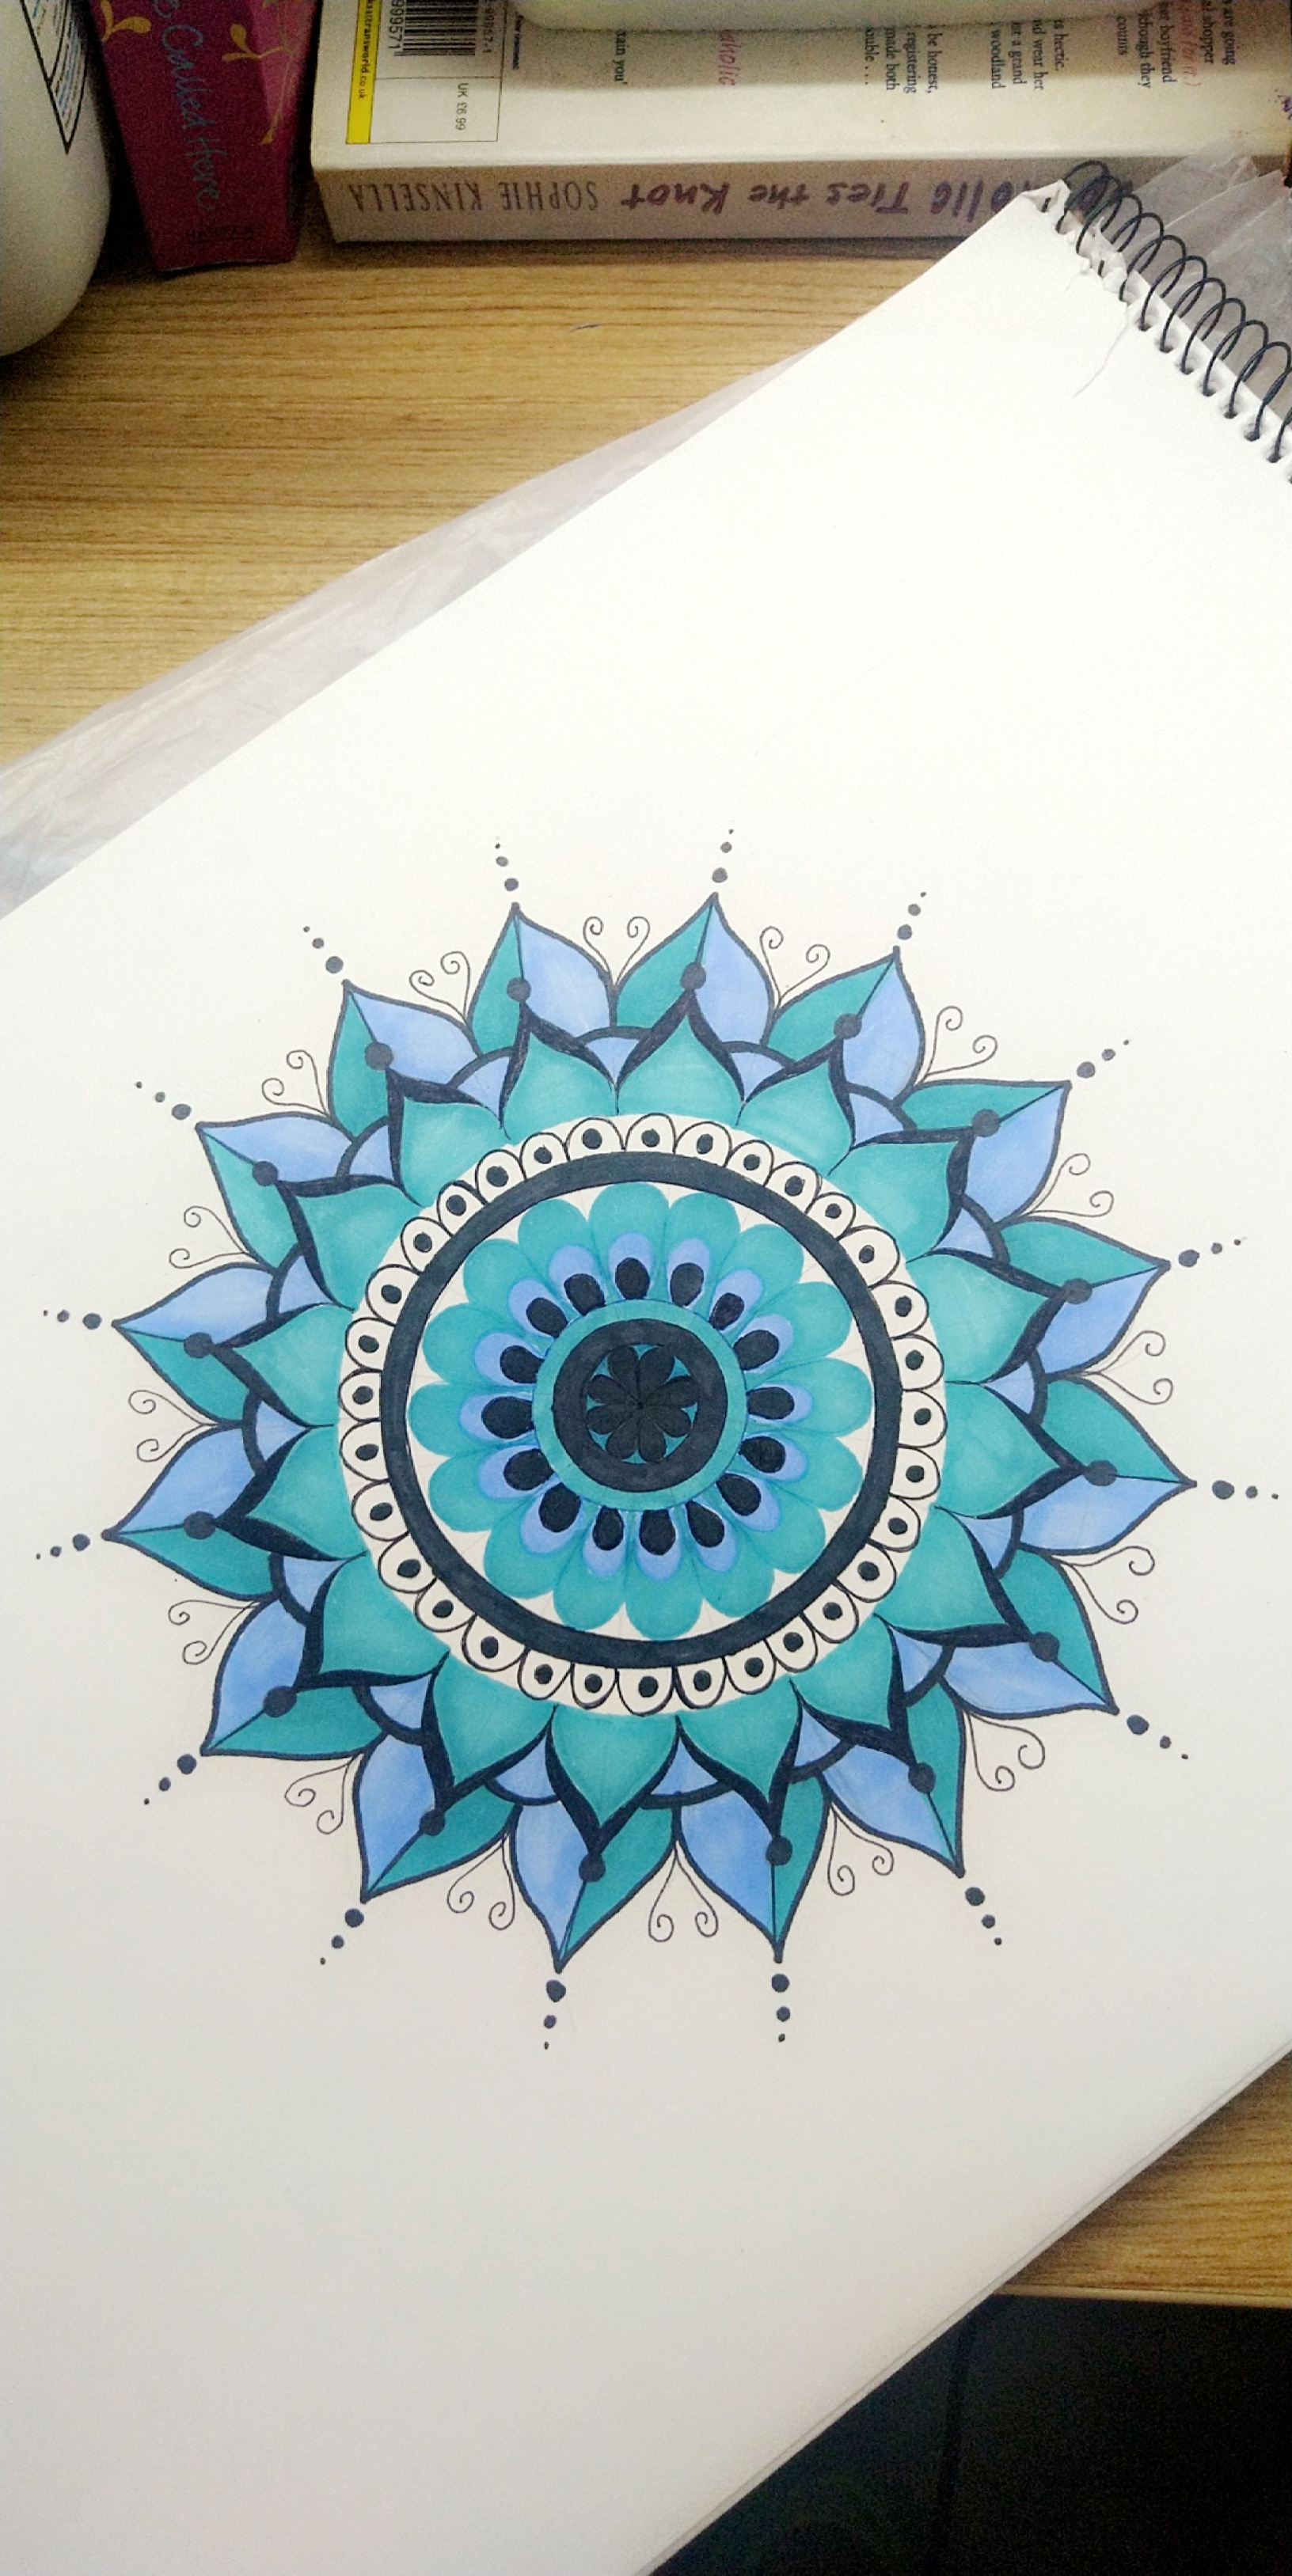 Mandalas, my way of getting over all the COVID-19 anxiety